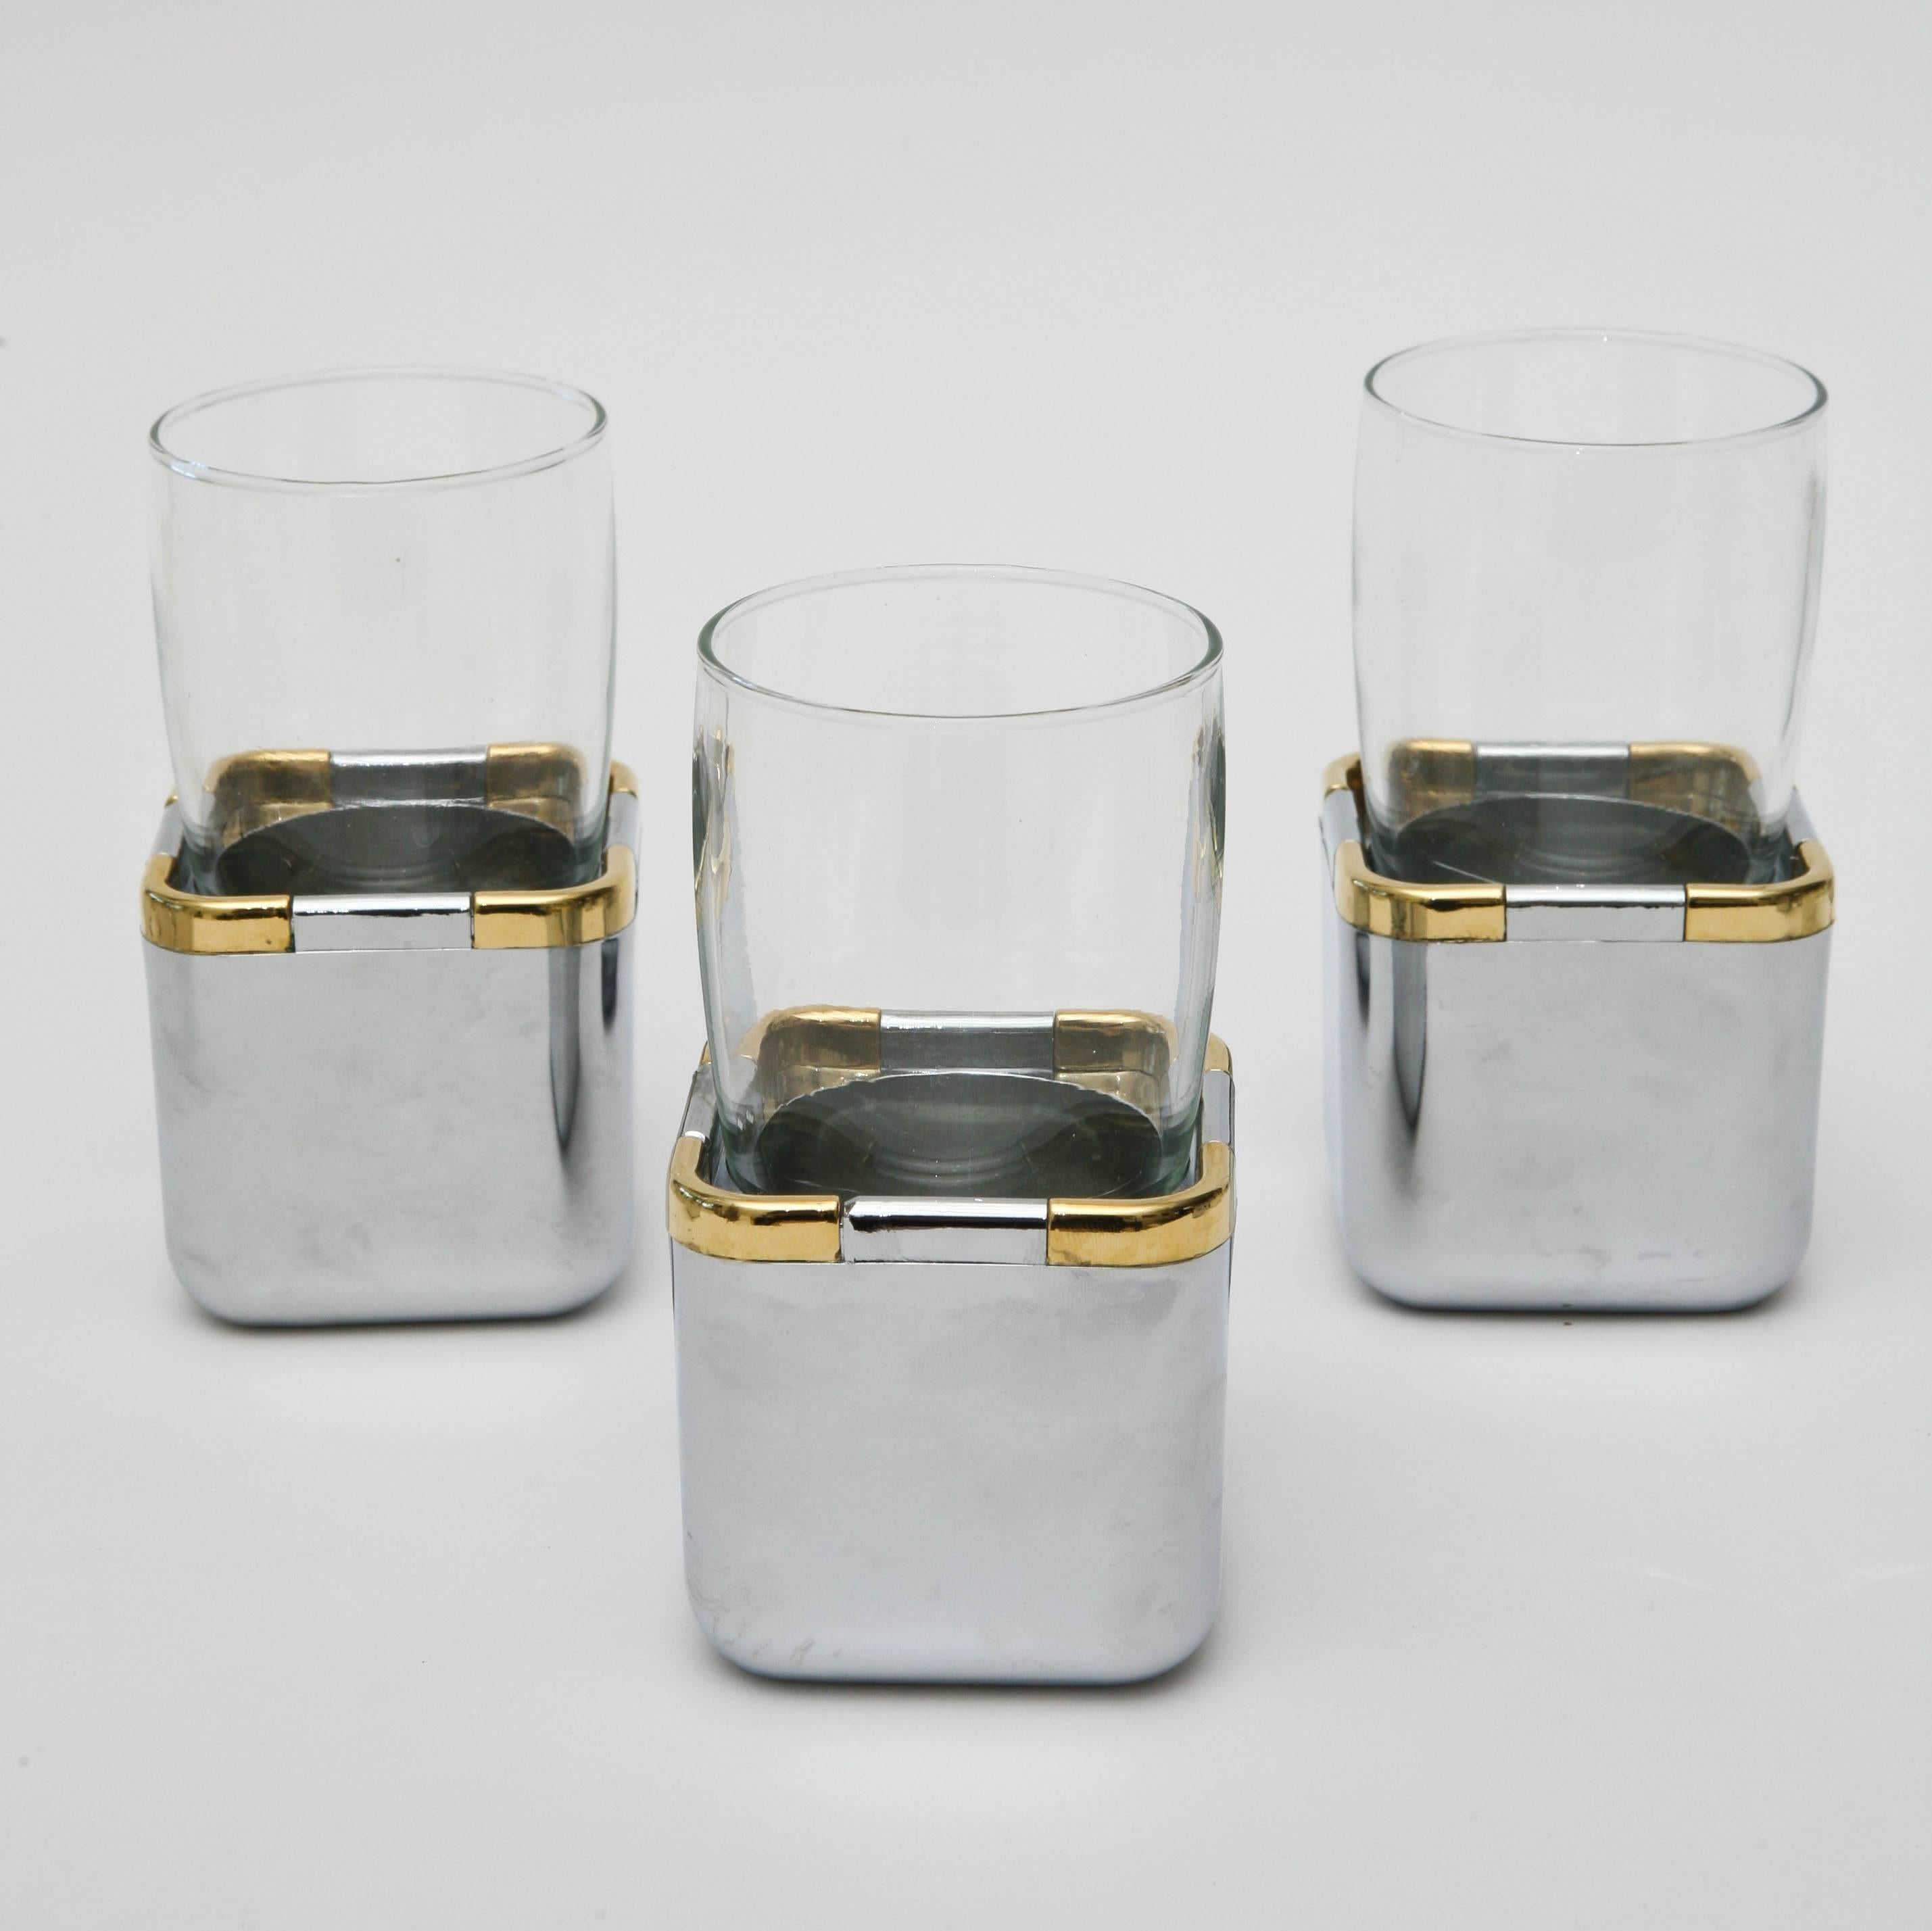 Late 20th Century Set of 16 Resin, Glass and Gold-Plated Garden Drinking Glasses Barware